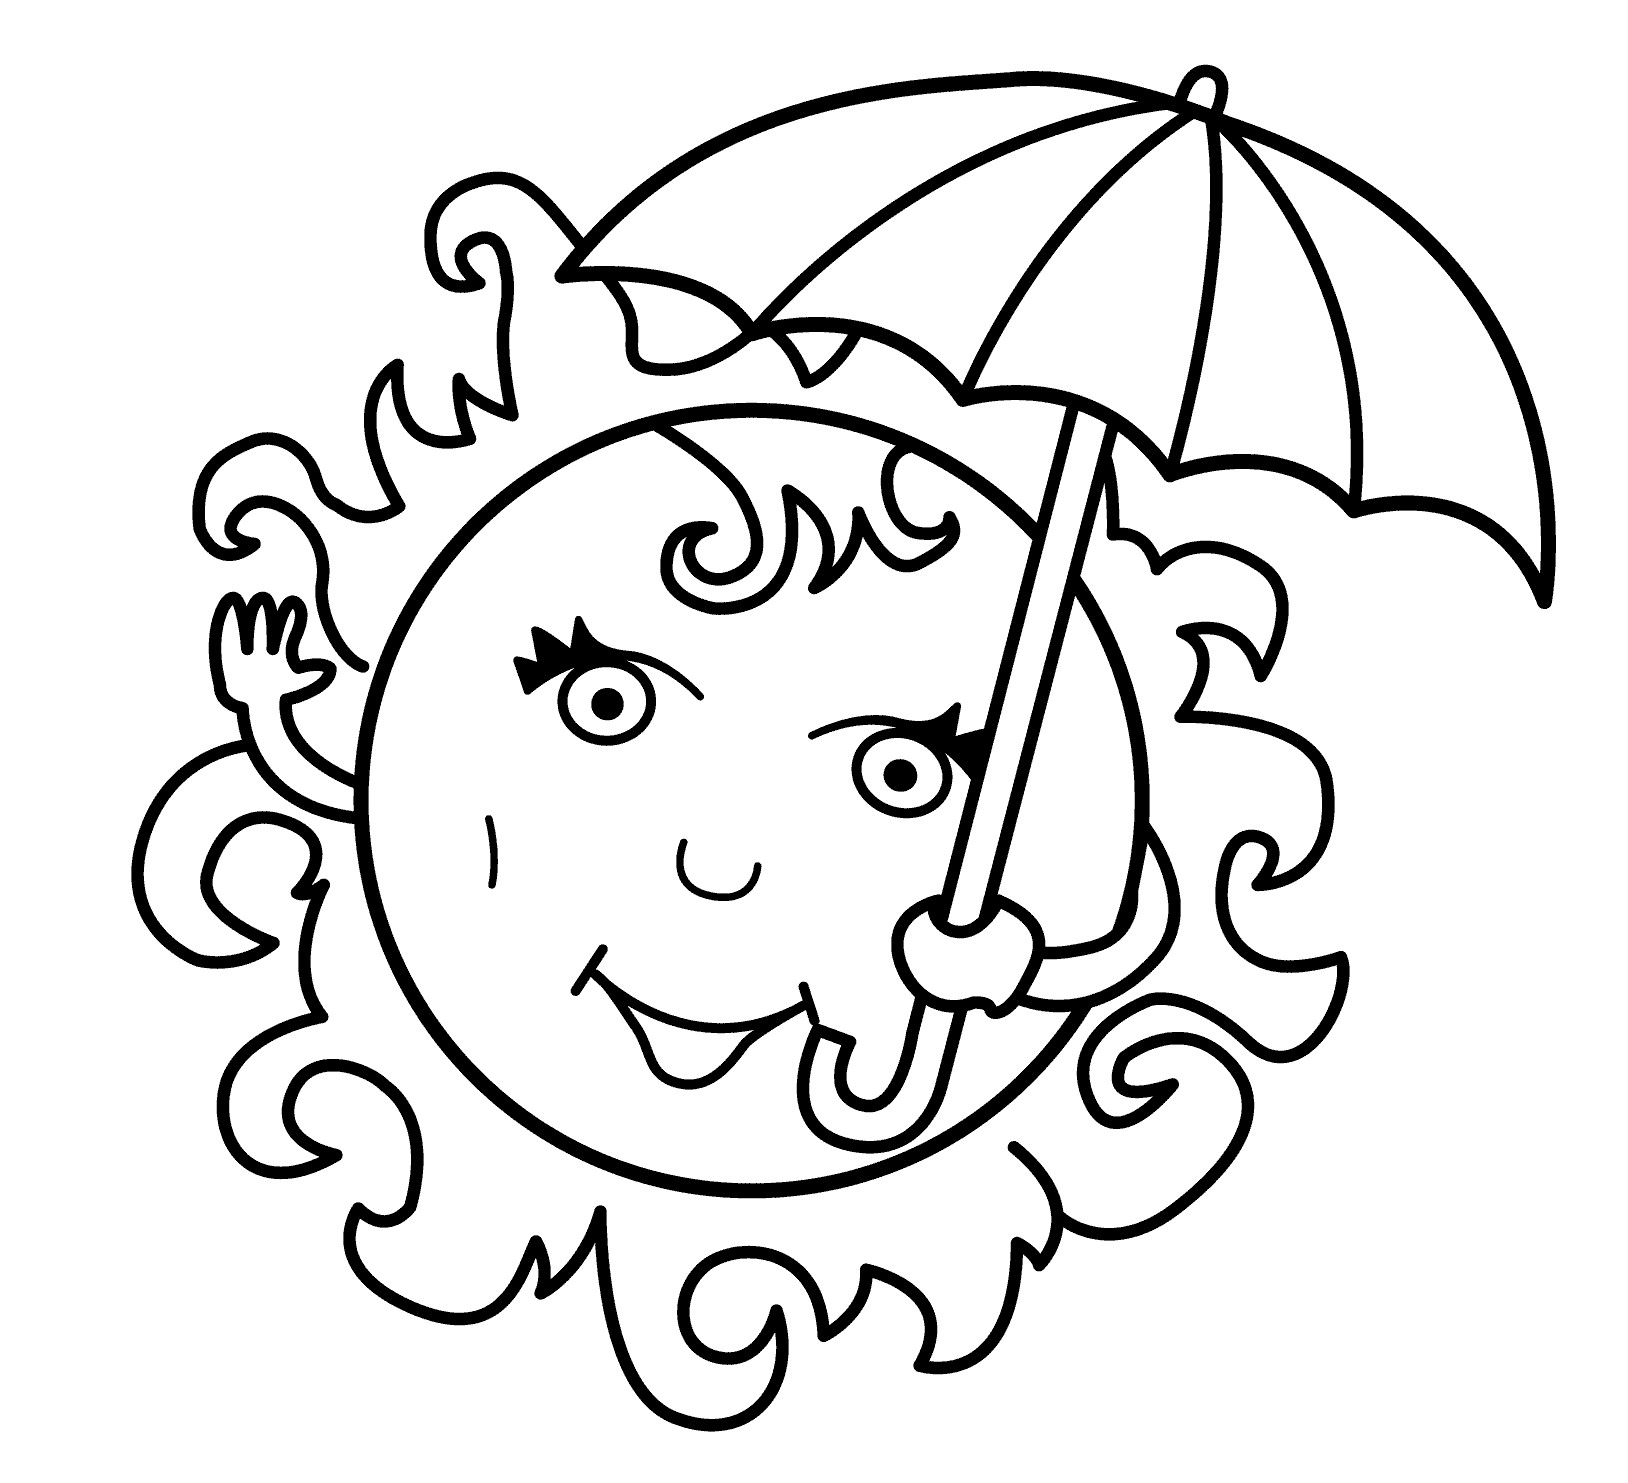 Summer Printable Coloring Pages
 Download Free Printable Summer Coloring Pages for Kids